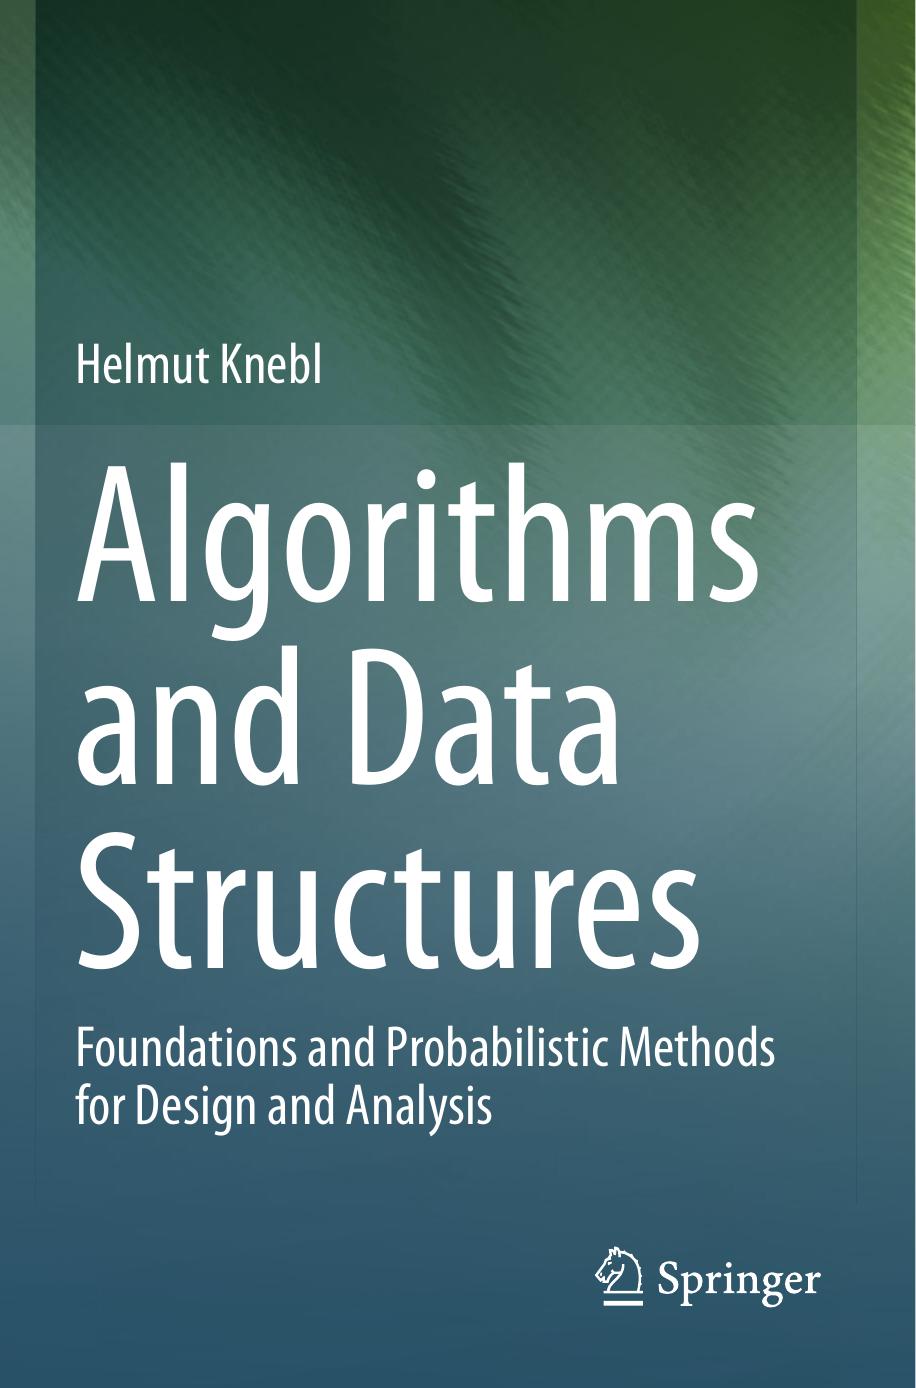 Algorithms and Data Structures: Foundations and Probabilistic Methods for Design and Analysis